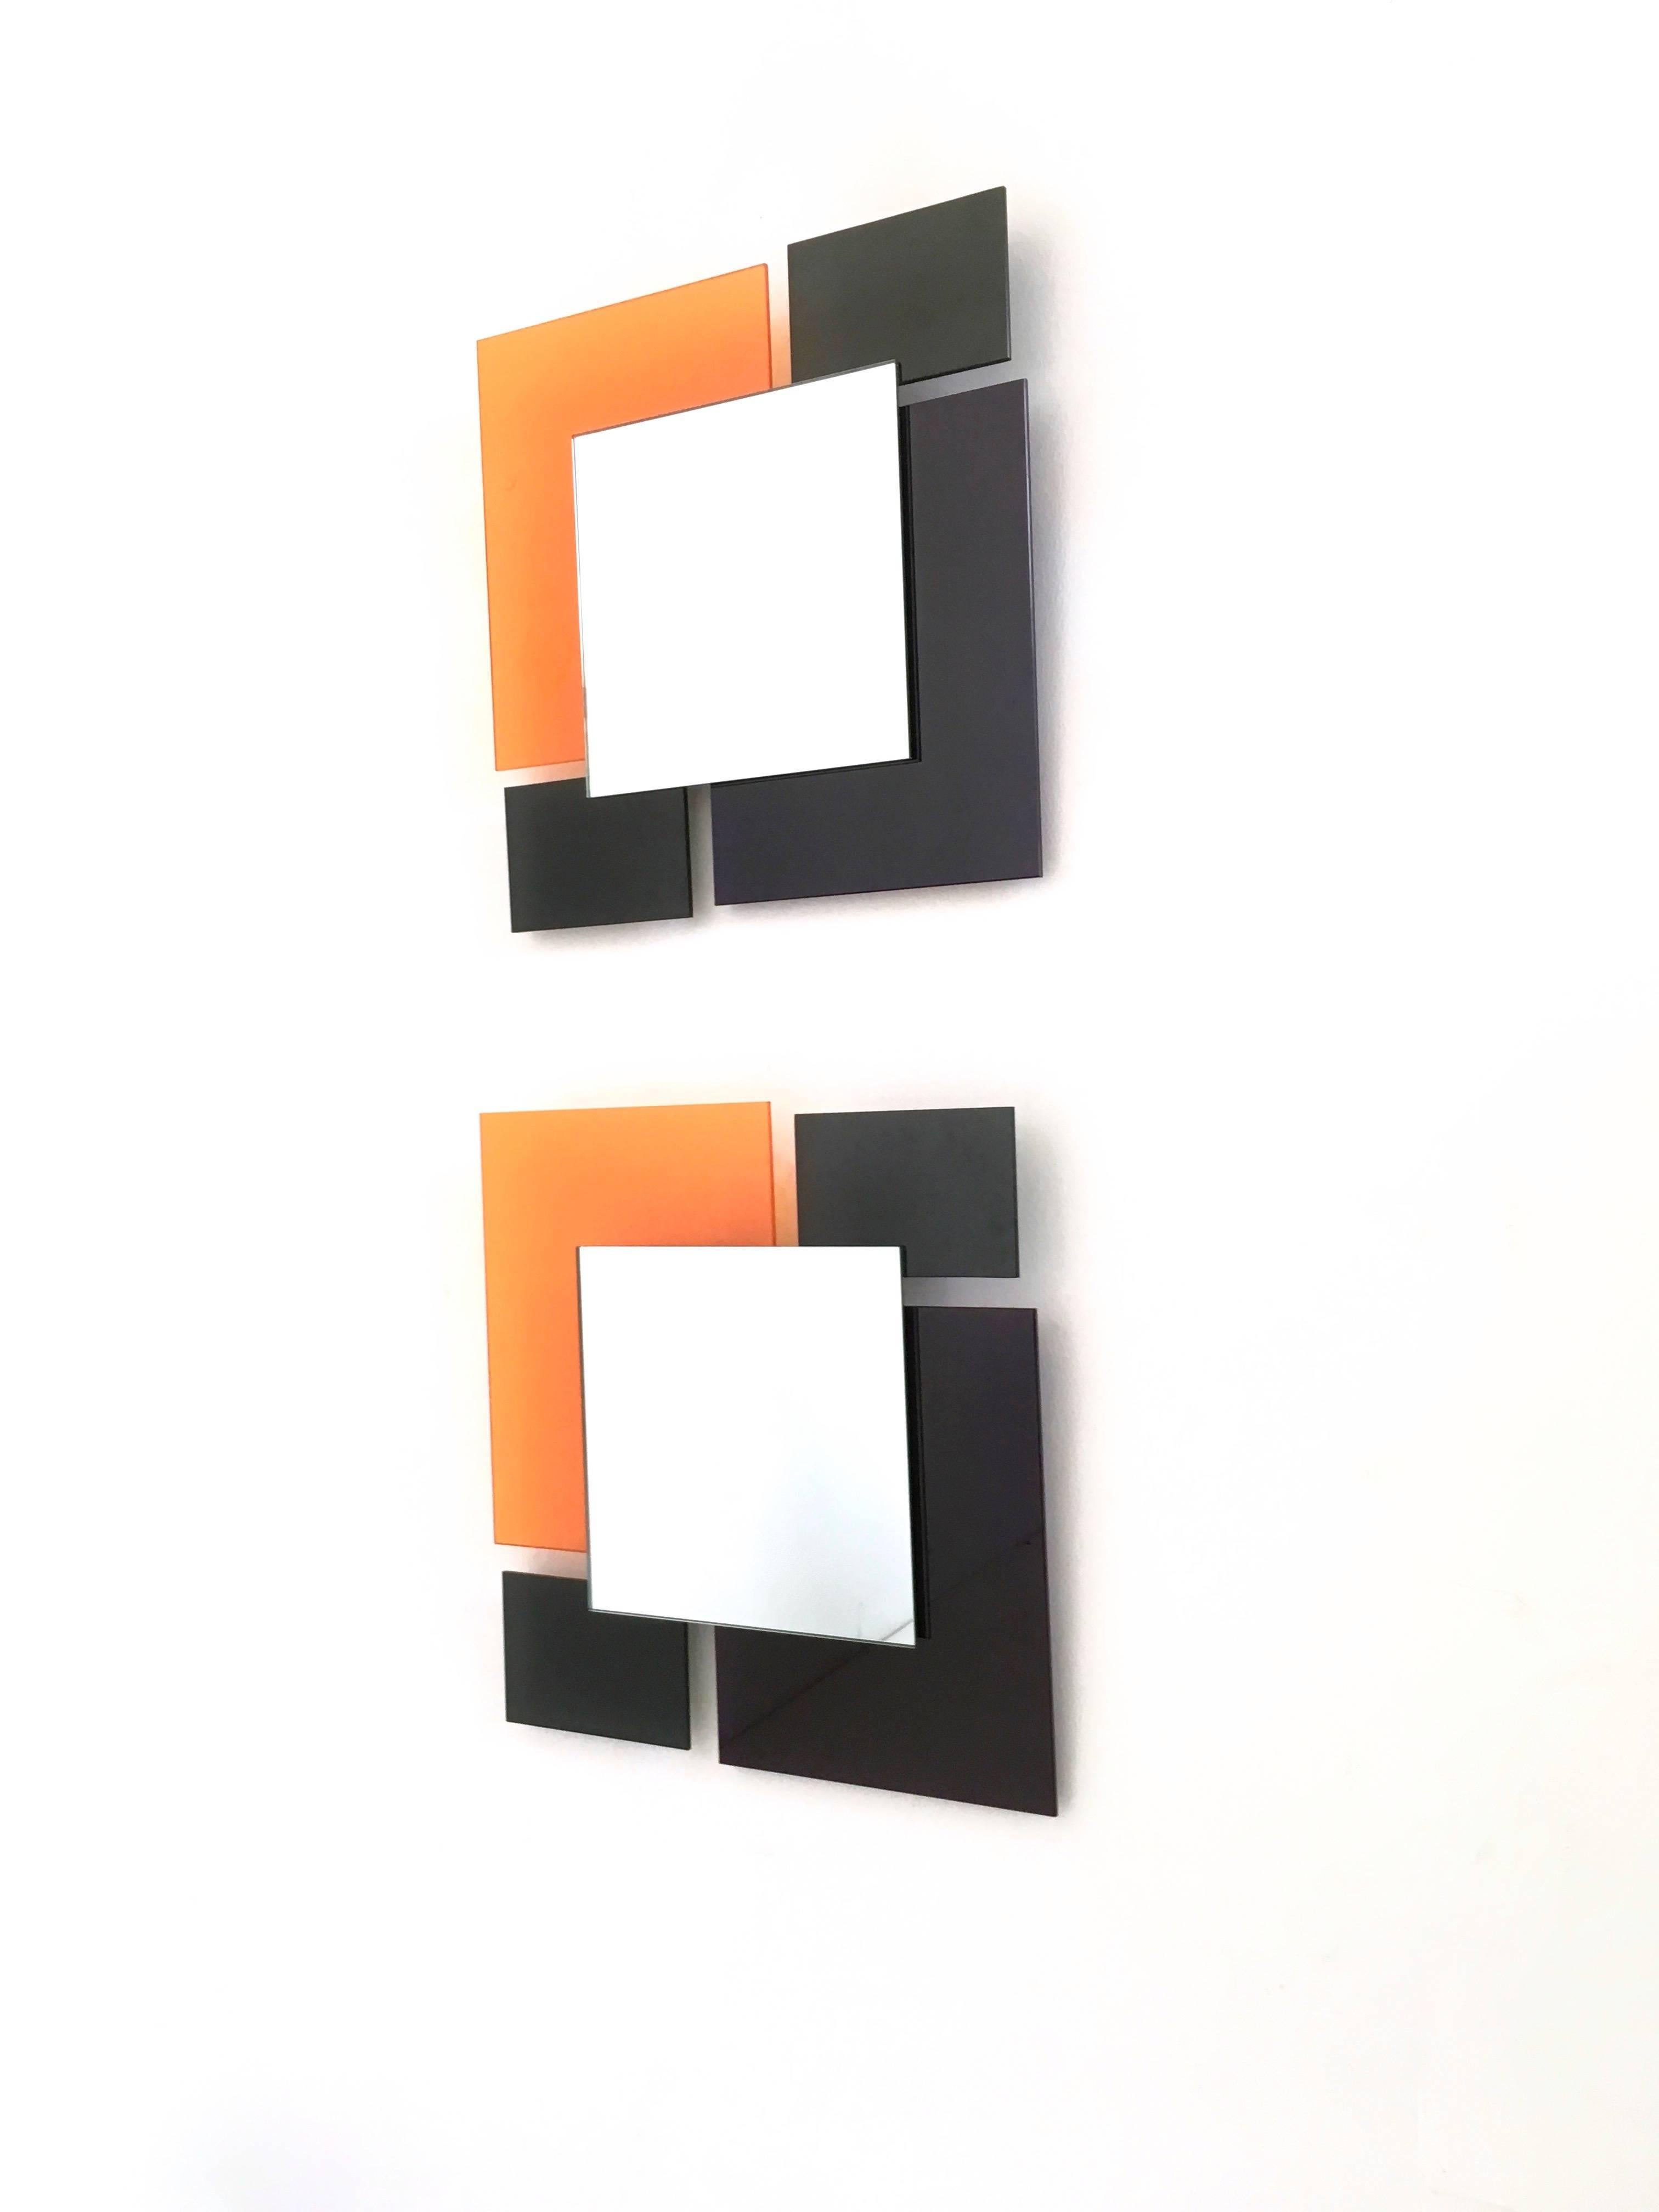 Italian Pair of Postmodern Black and Orange Wall Mirrors in the Style of Sottsass, 1980s For Sale